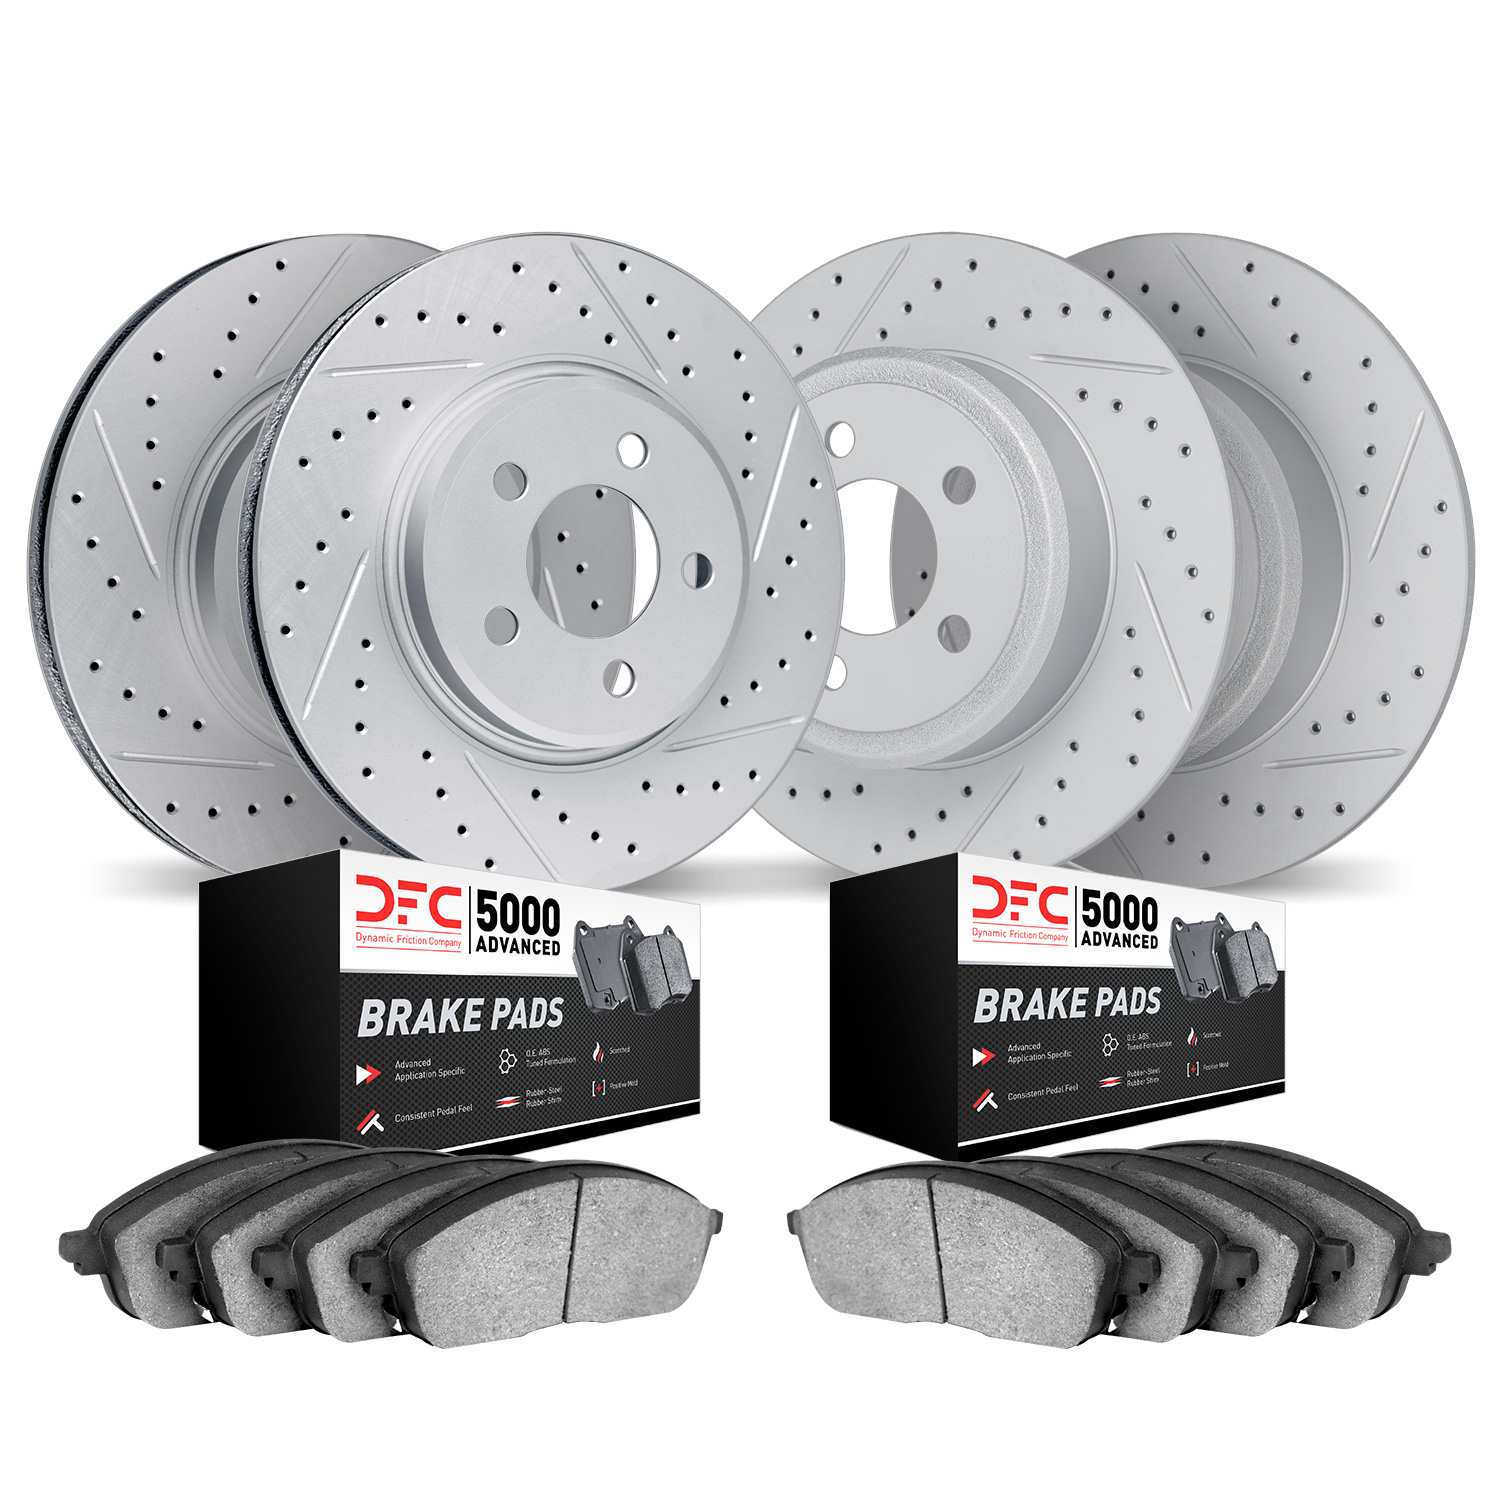 2504-76100 Geoperformance Drilled/Slotted Rotors w/5000 Advanced Brake Pads Kit, 2002-2003 Lexus/Toyota/Scion, Position: Front a